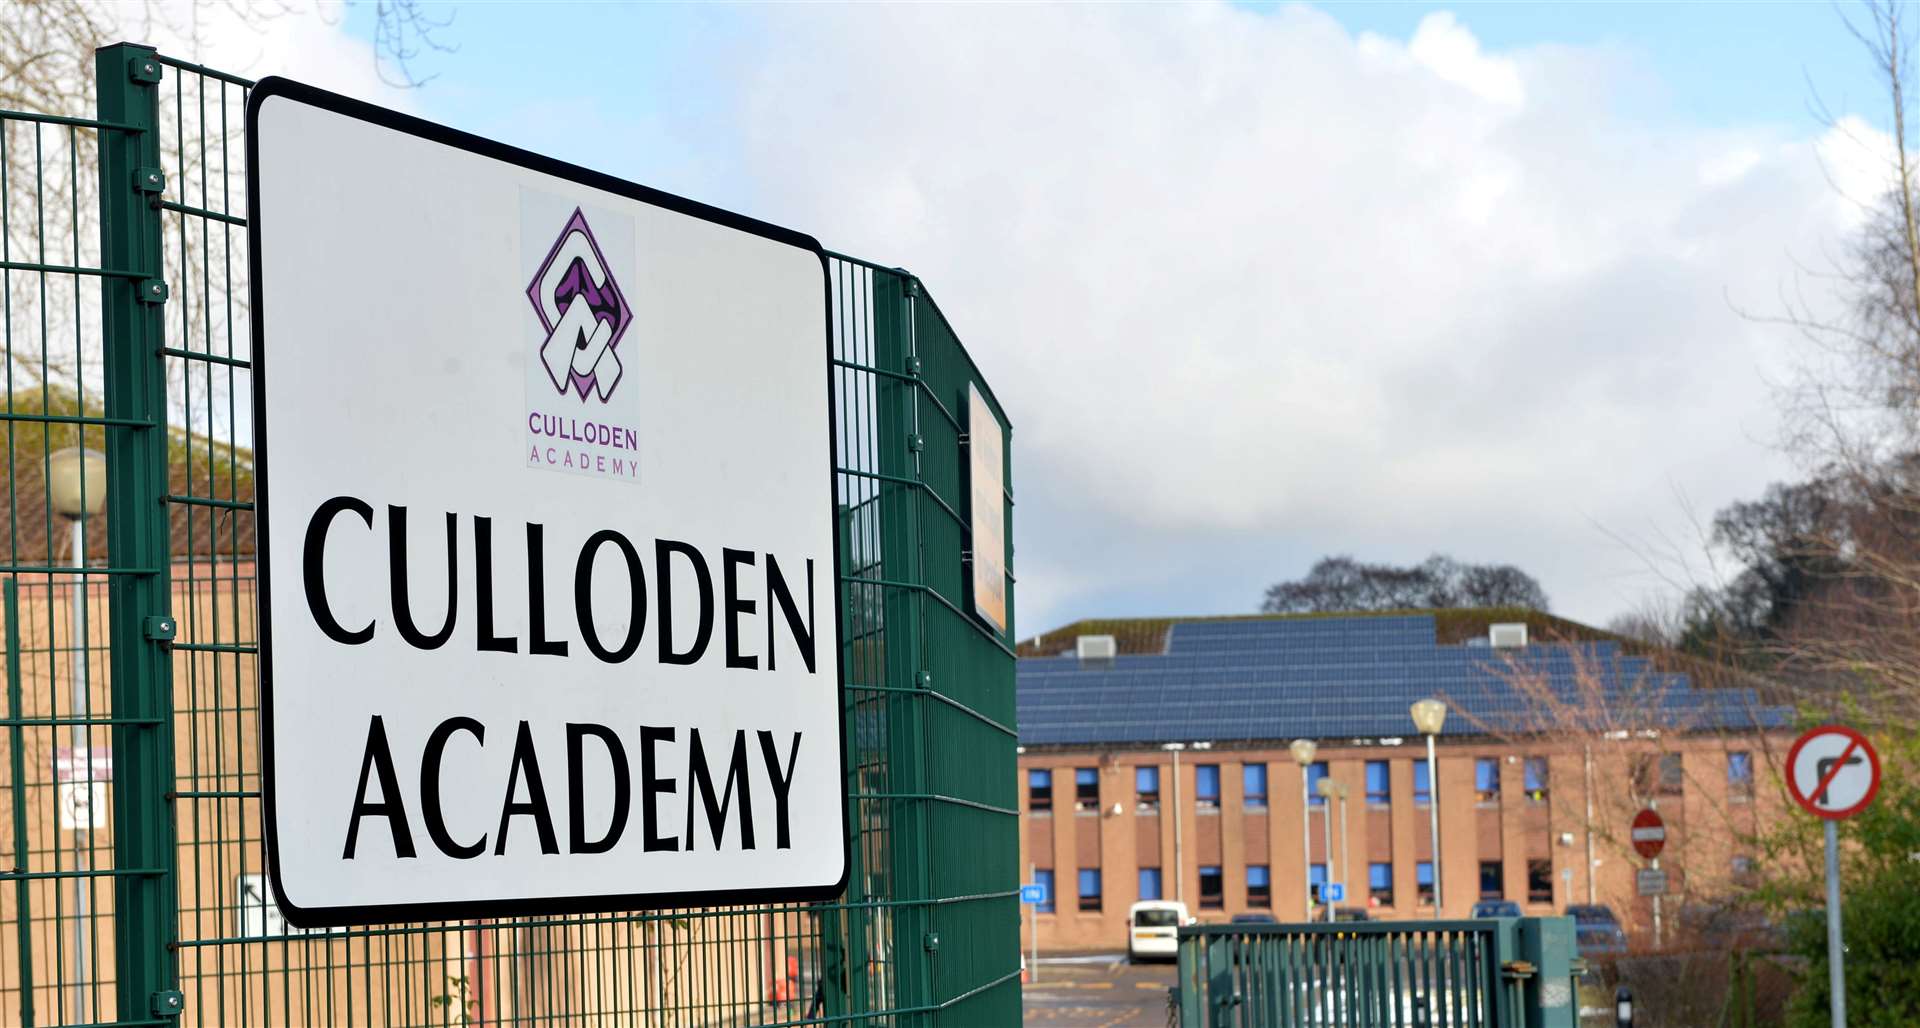 Culloden Academy in Inverness.